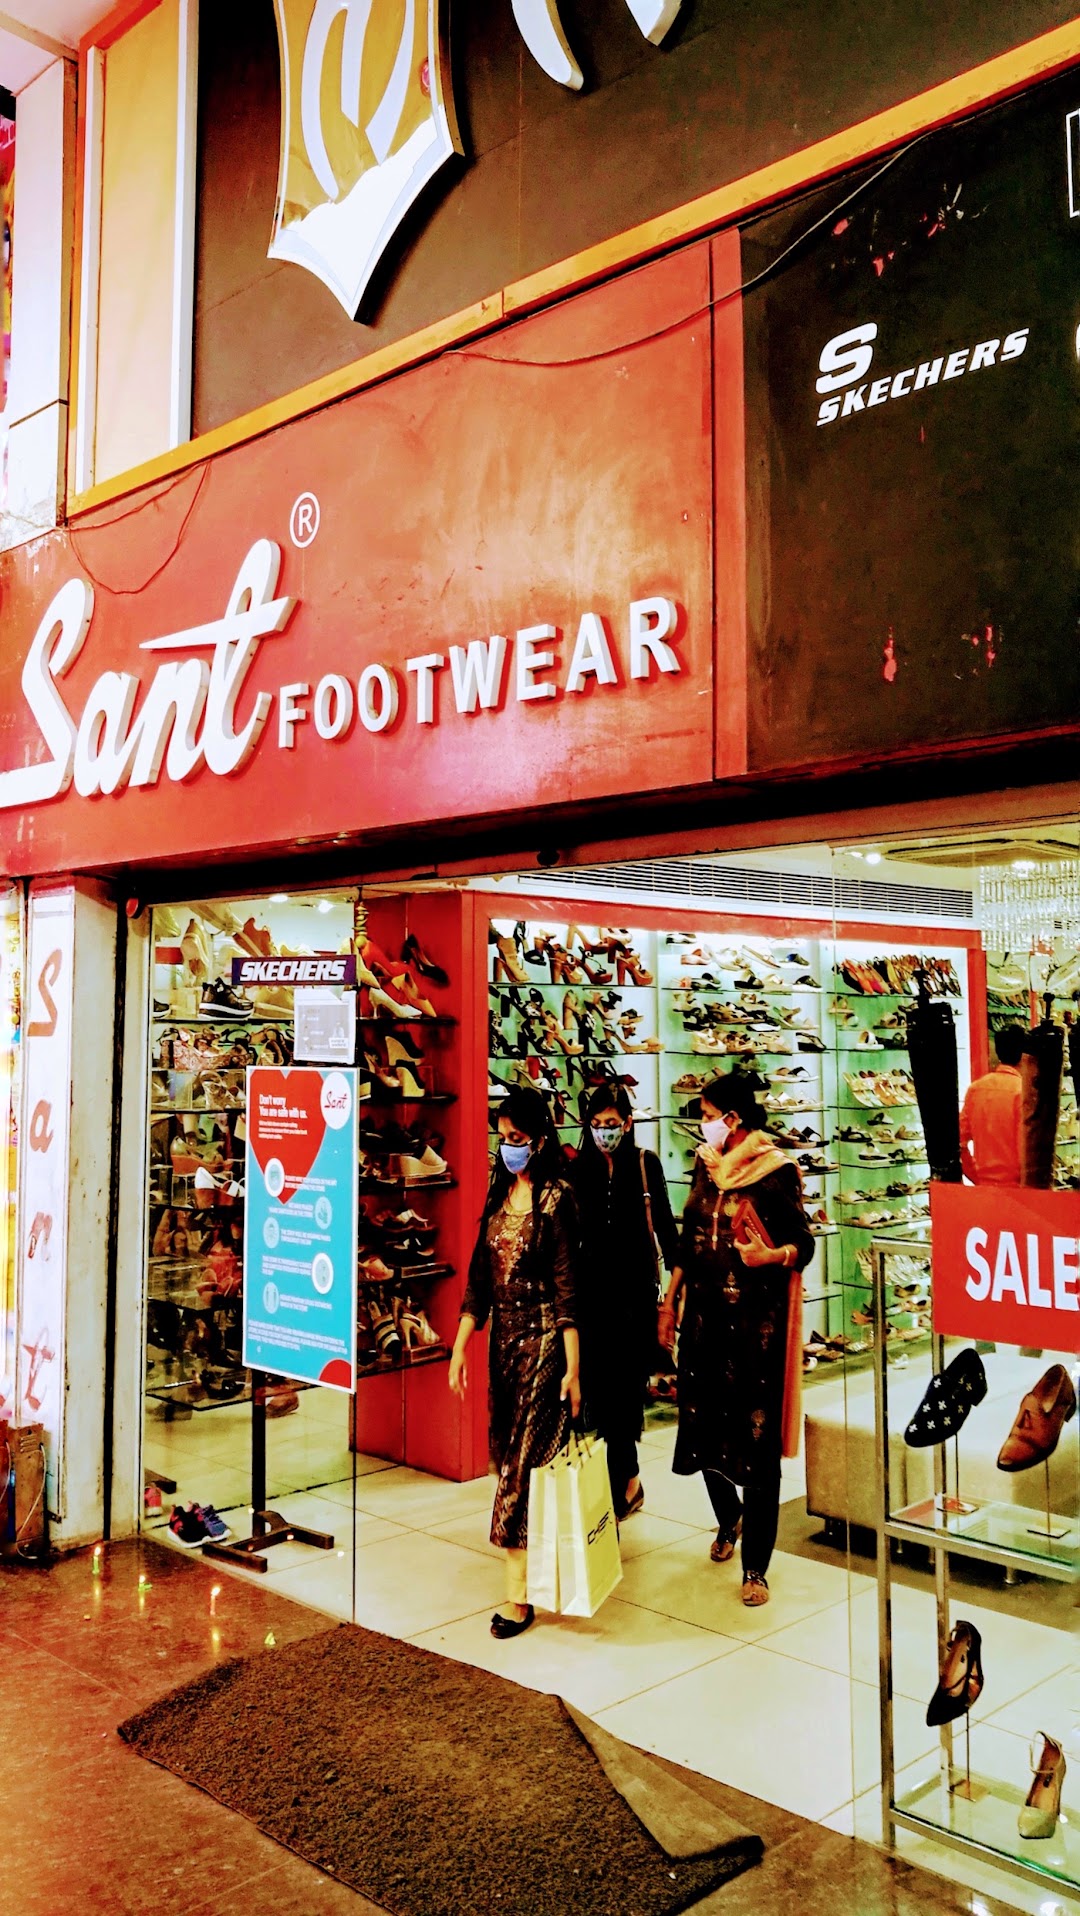 Sant Footwear Private Limited